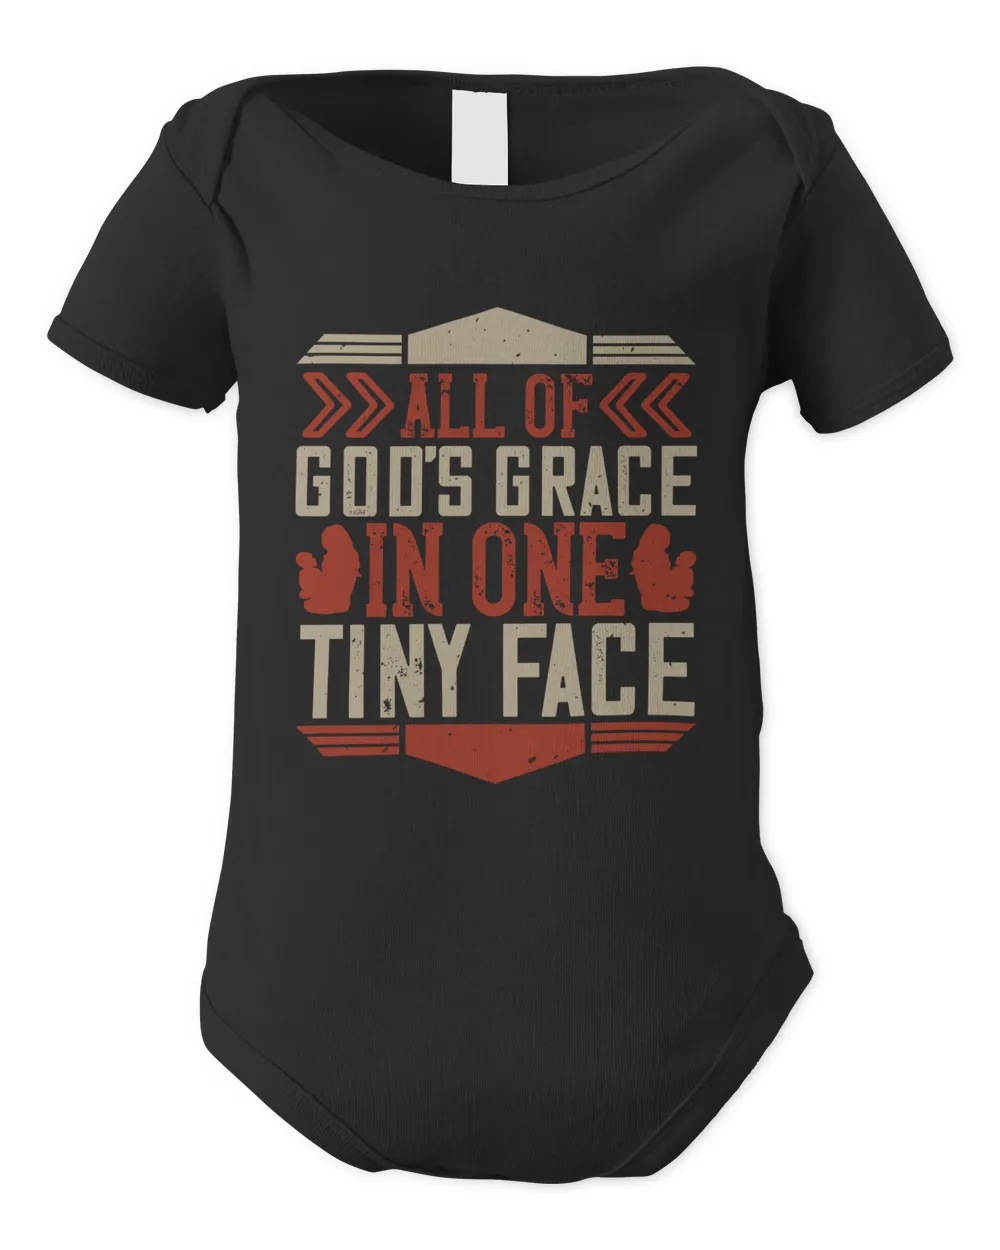 All Of God’s Grace In One Tiny Face Baby Shirt, Gift For Family, Toddler T Shirt, Baby Bodysuit